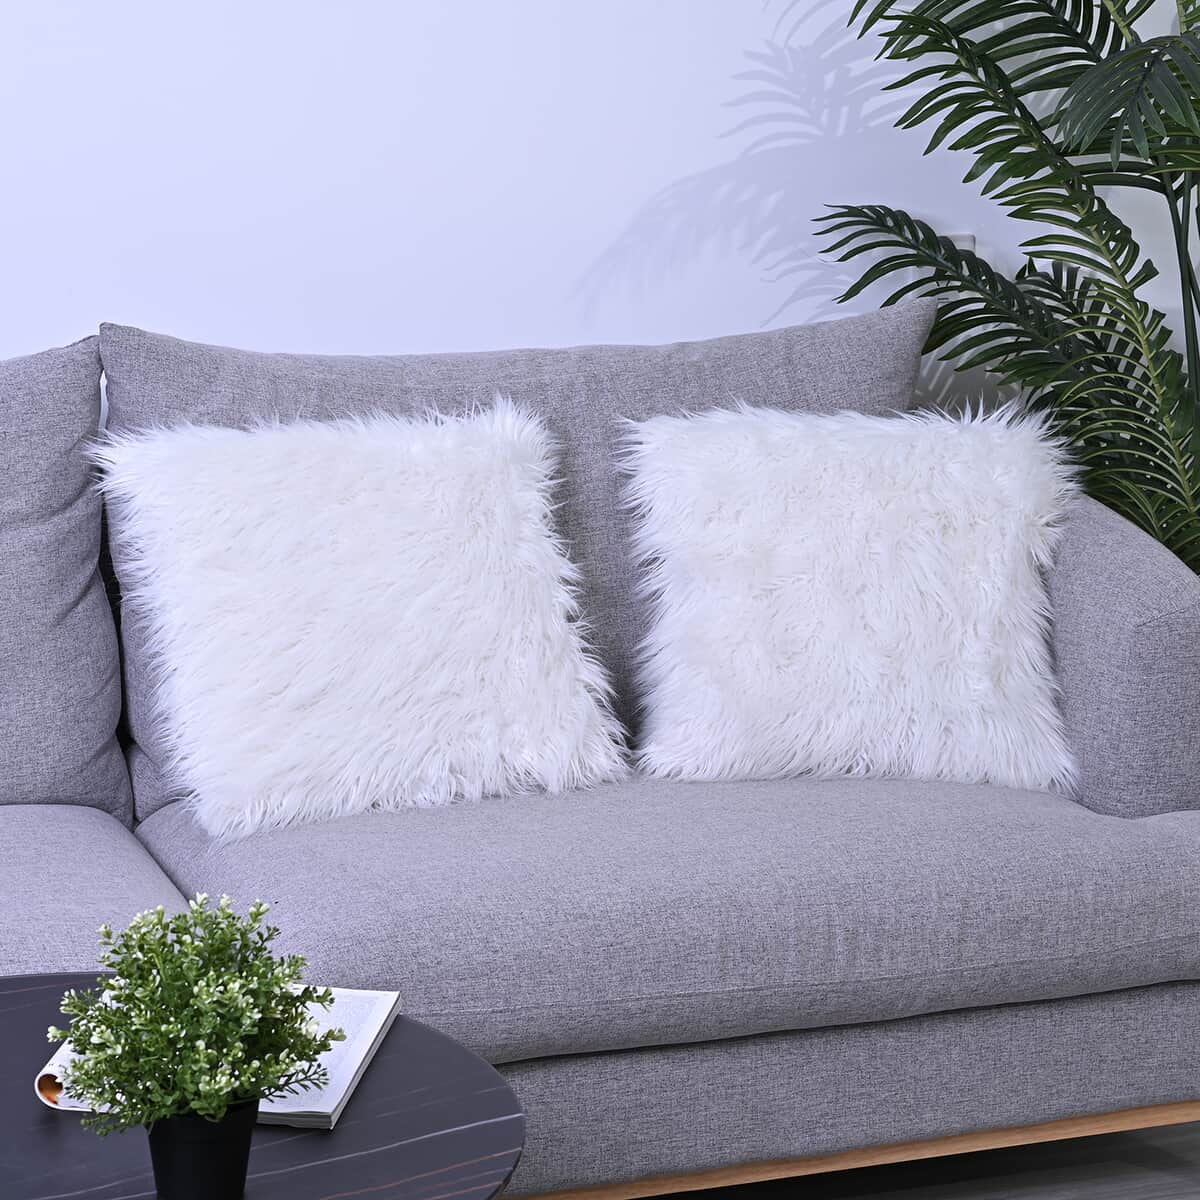 Set of 2 White Faux Fur Cushion Cover (18"x18") image number 1